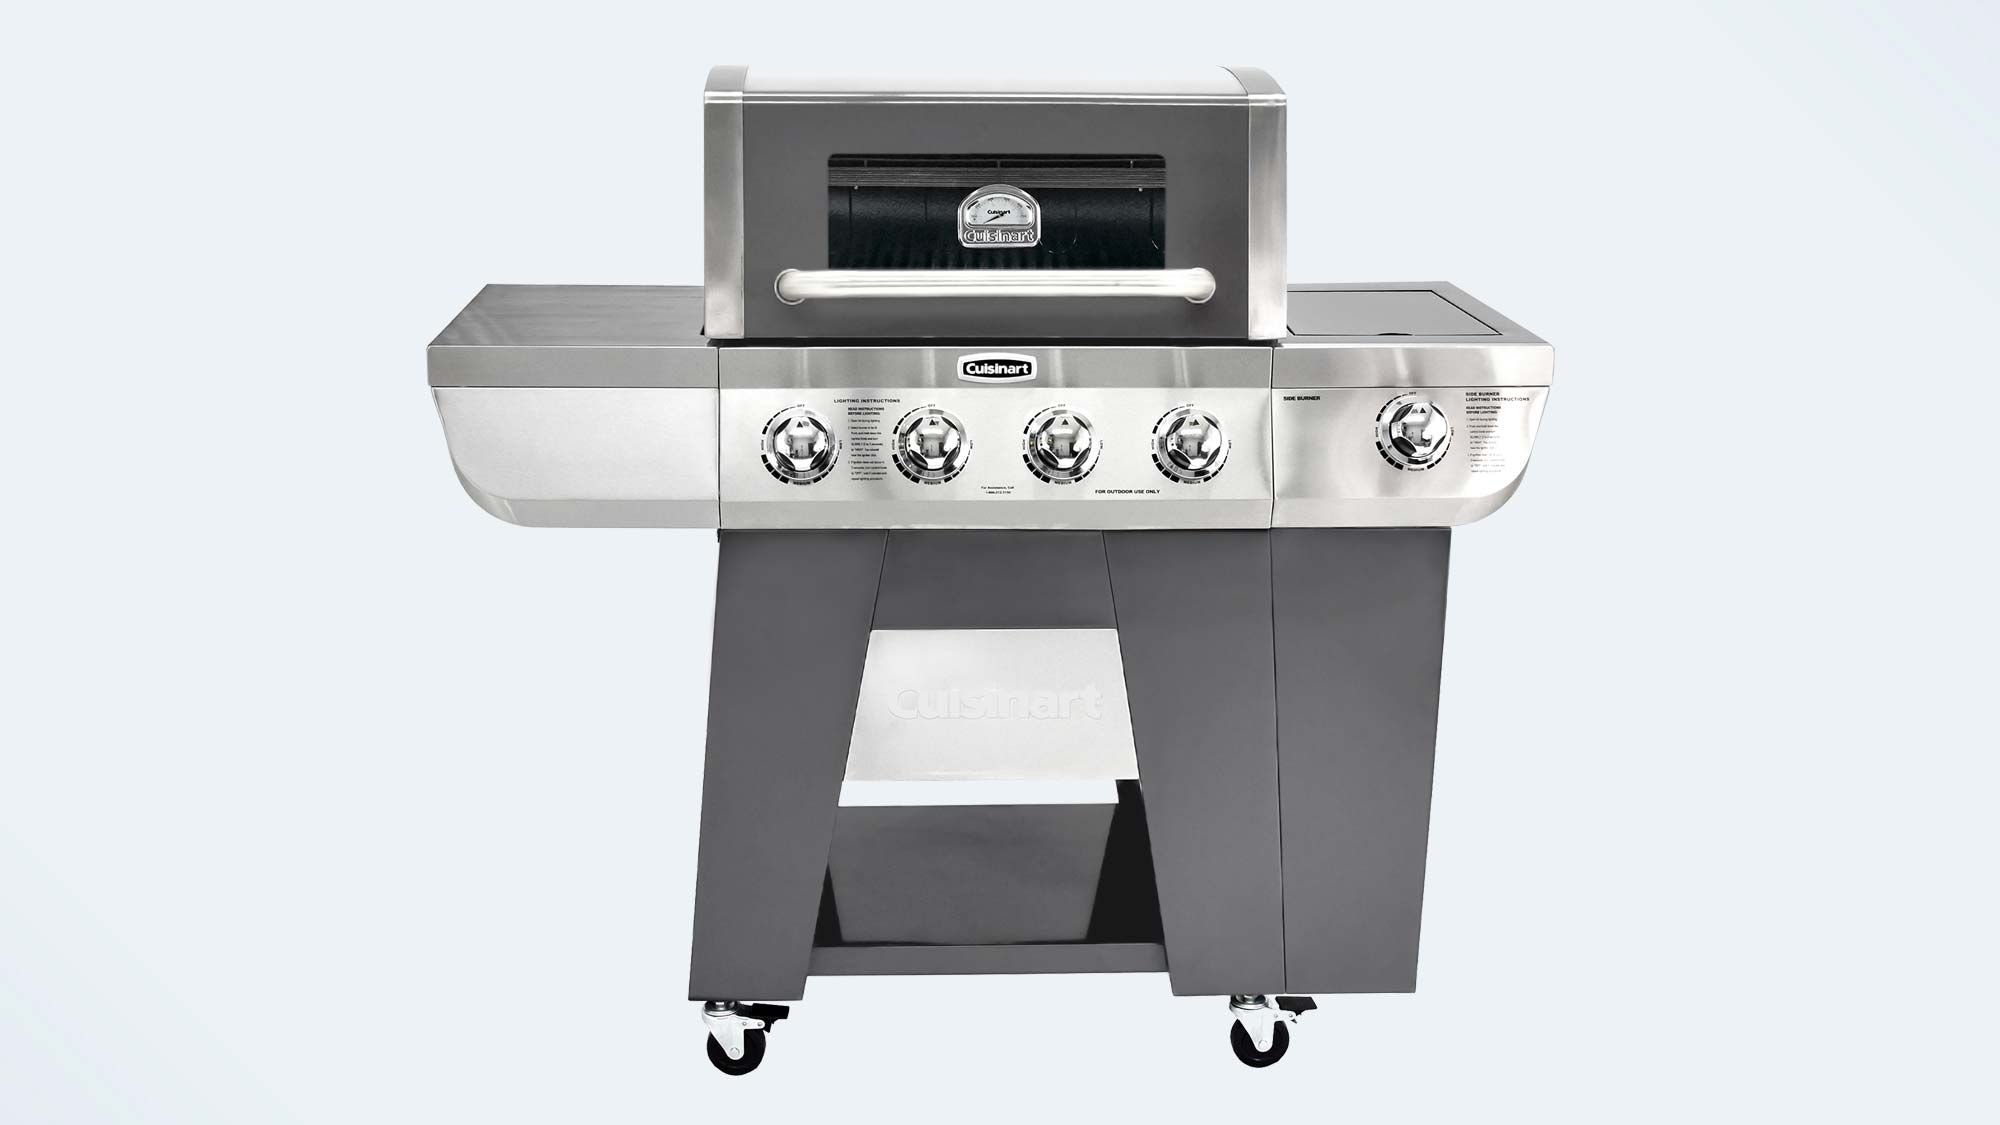 Cuisinart Deluxe Four Burner Gas Grill (GAS9456AS)